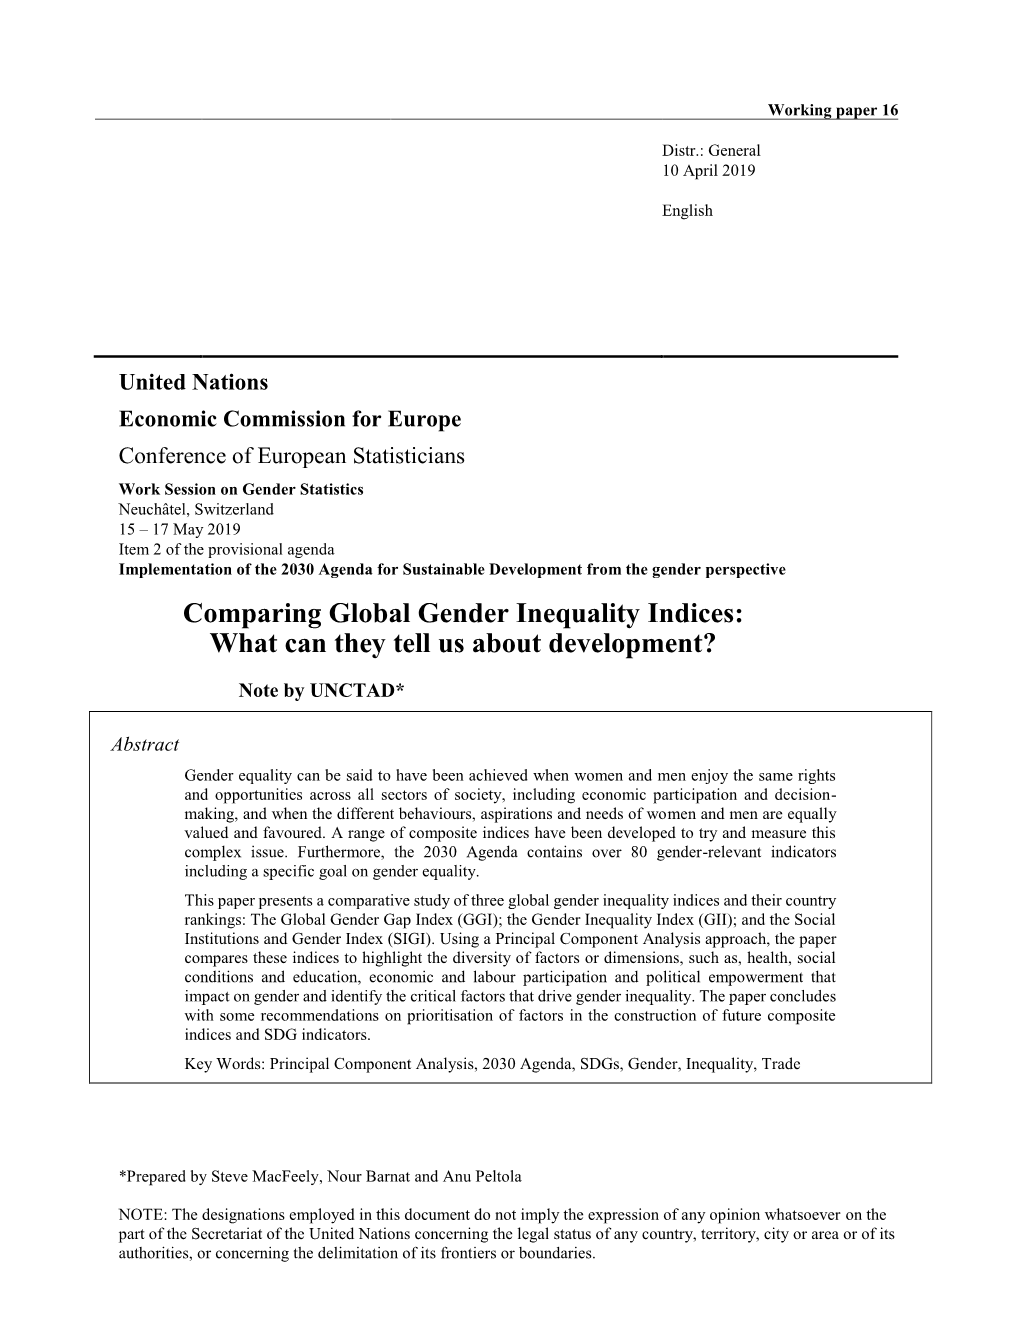 Comparing Global Gender Inequality Indices: What Can They Tell Us About Development?